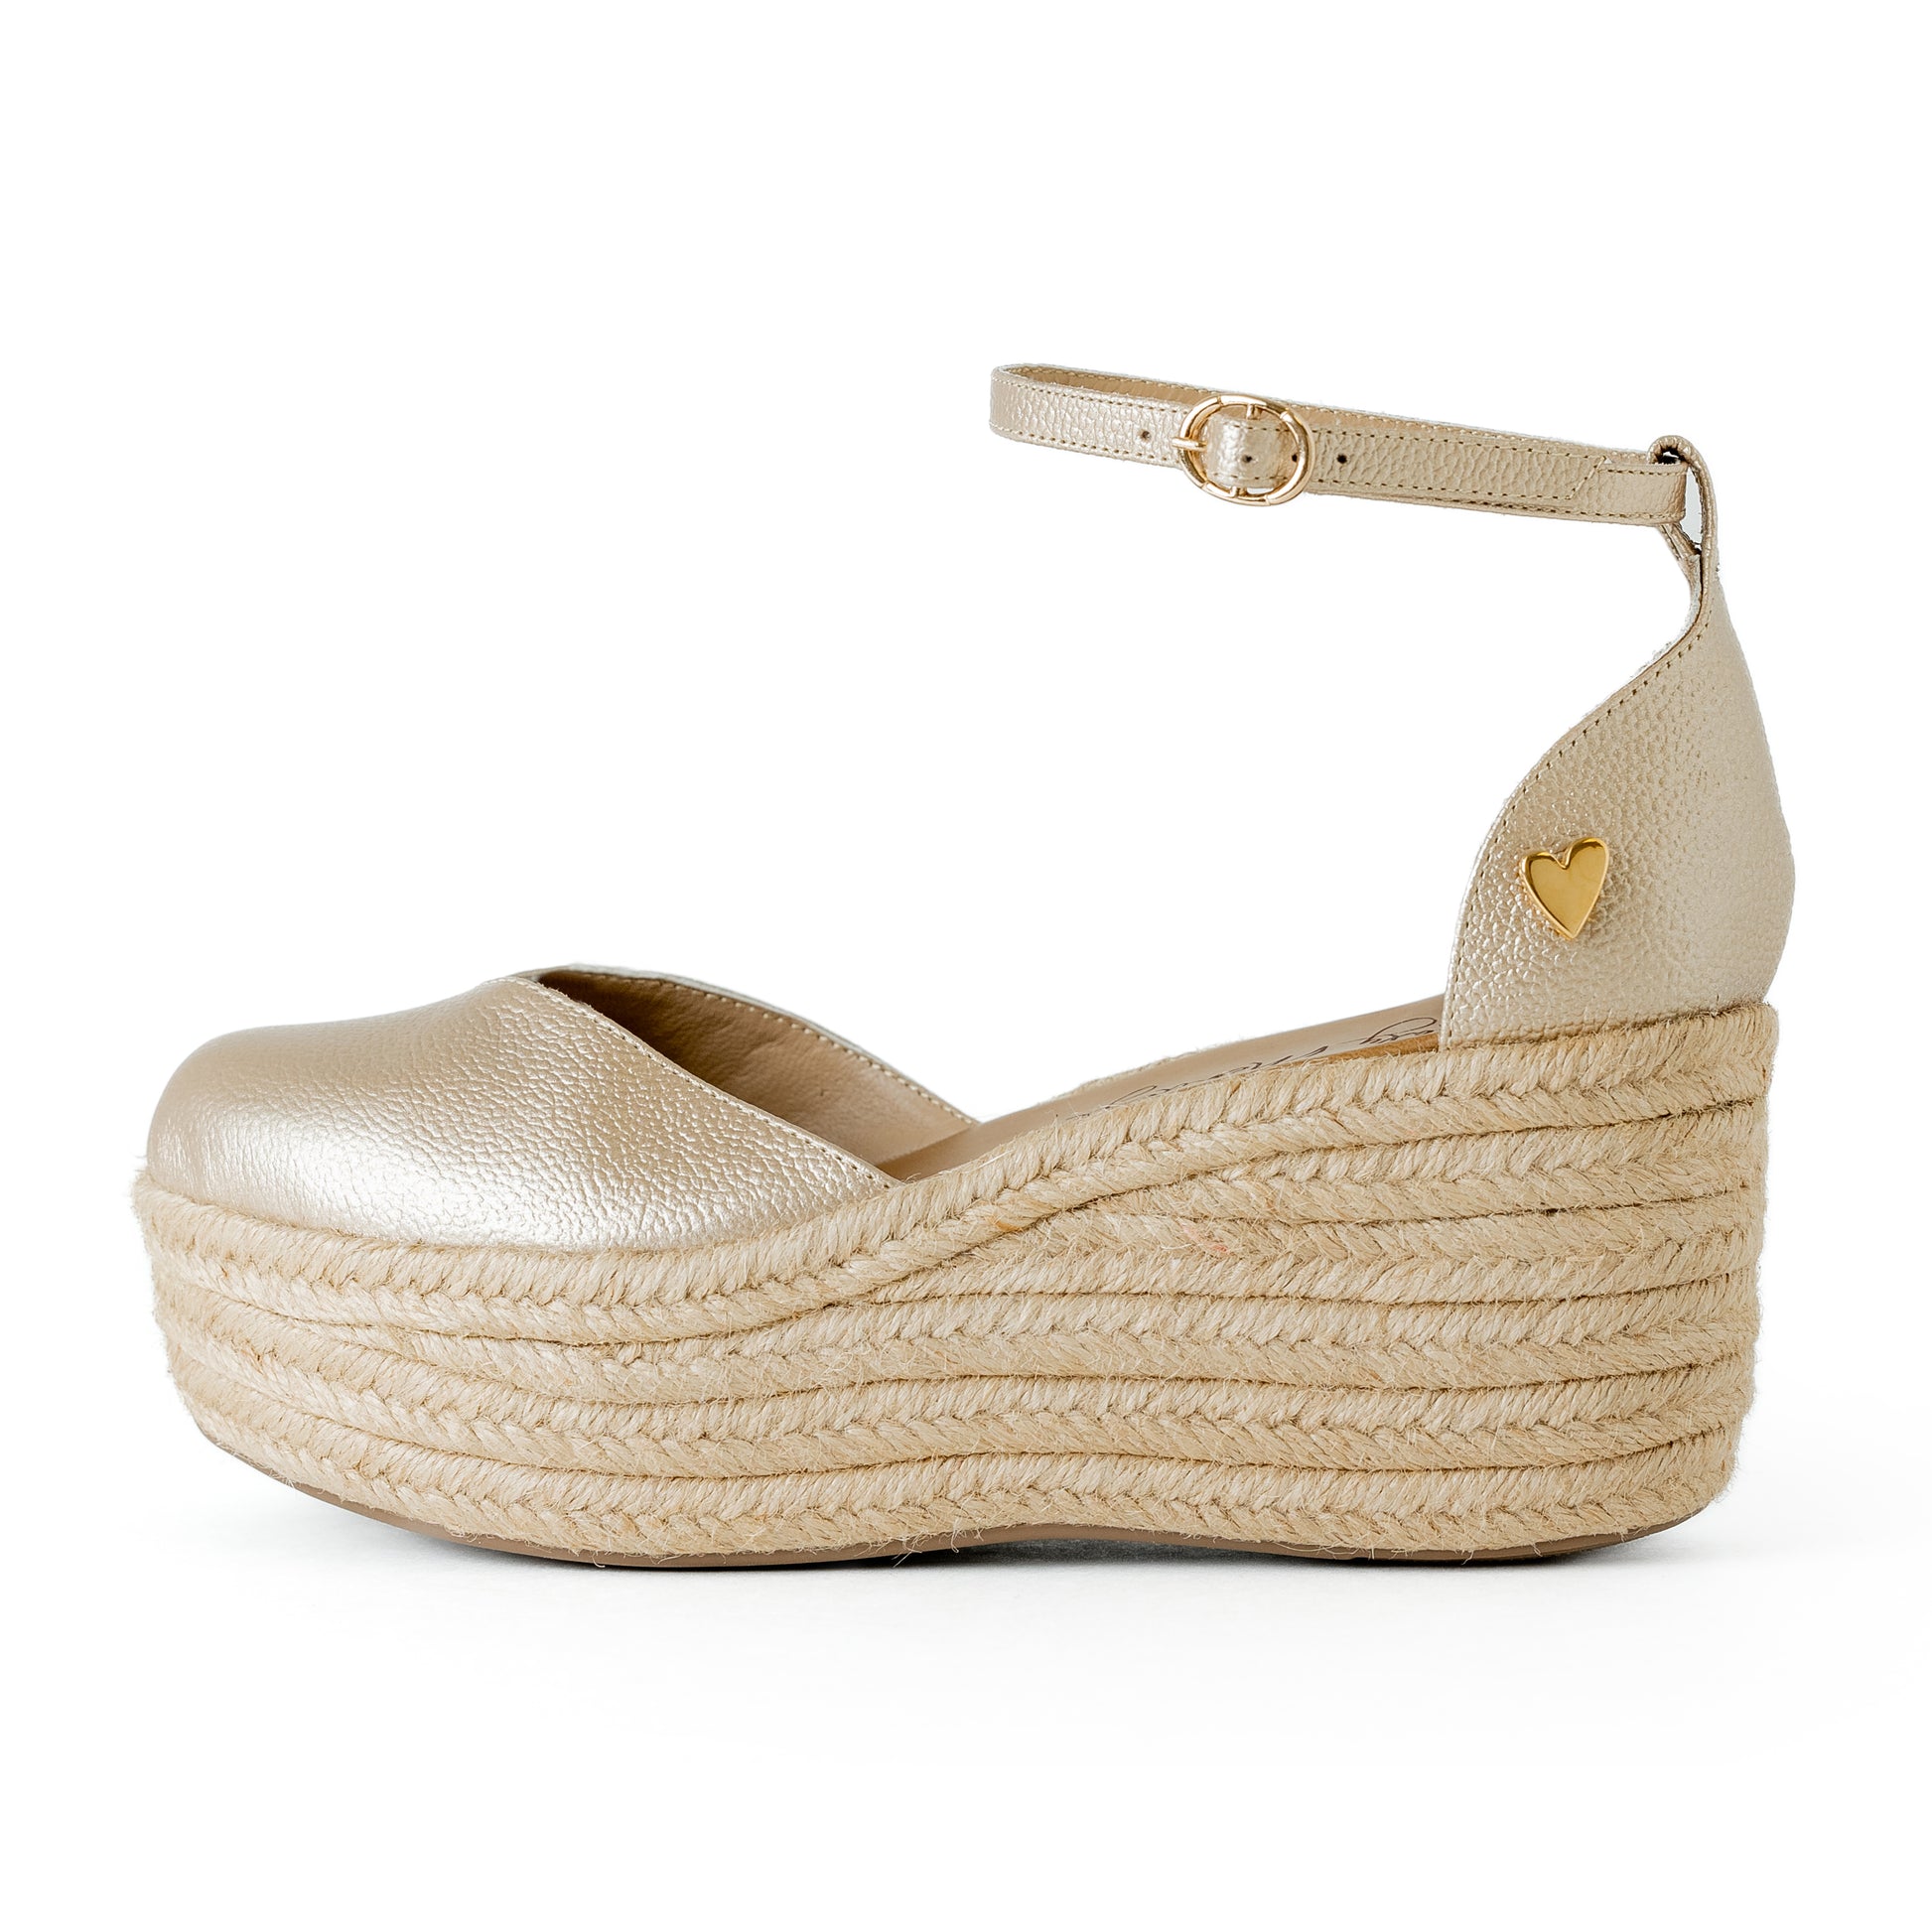 Gold Leather Espadrilles - Low High